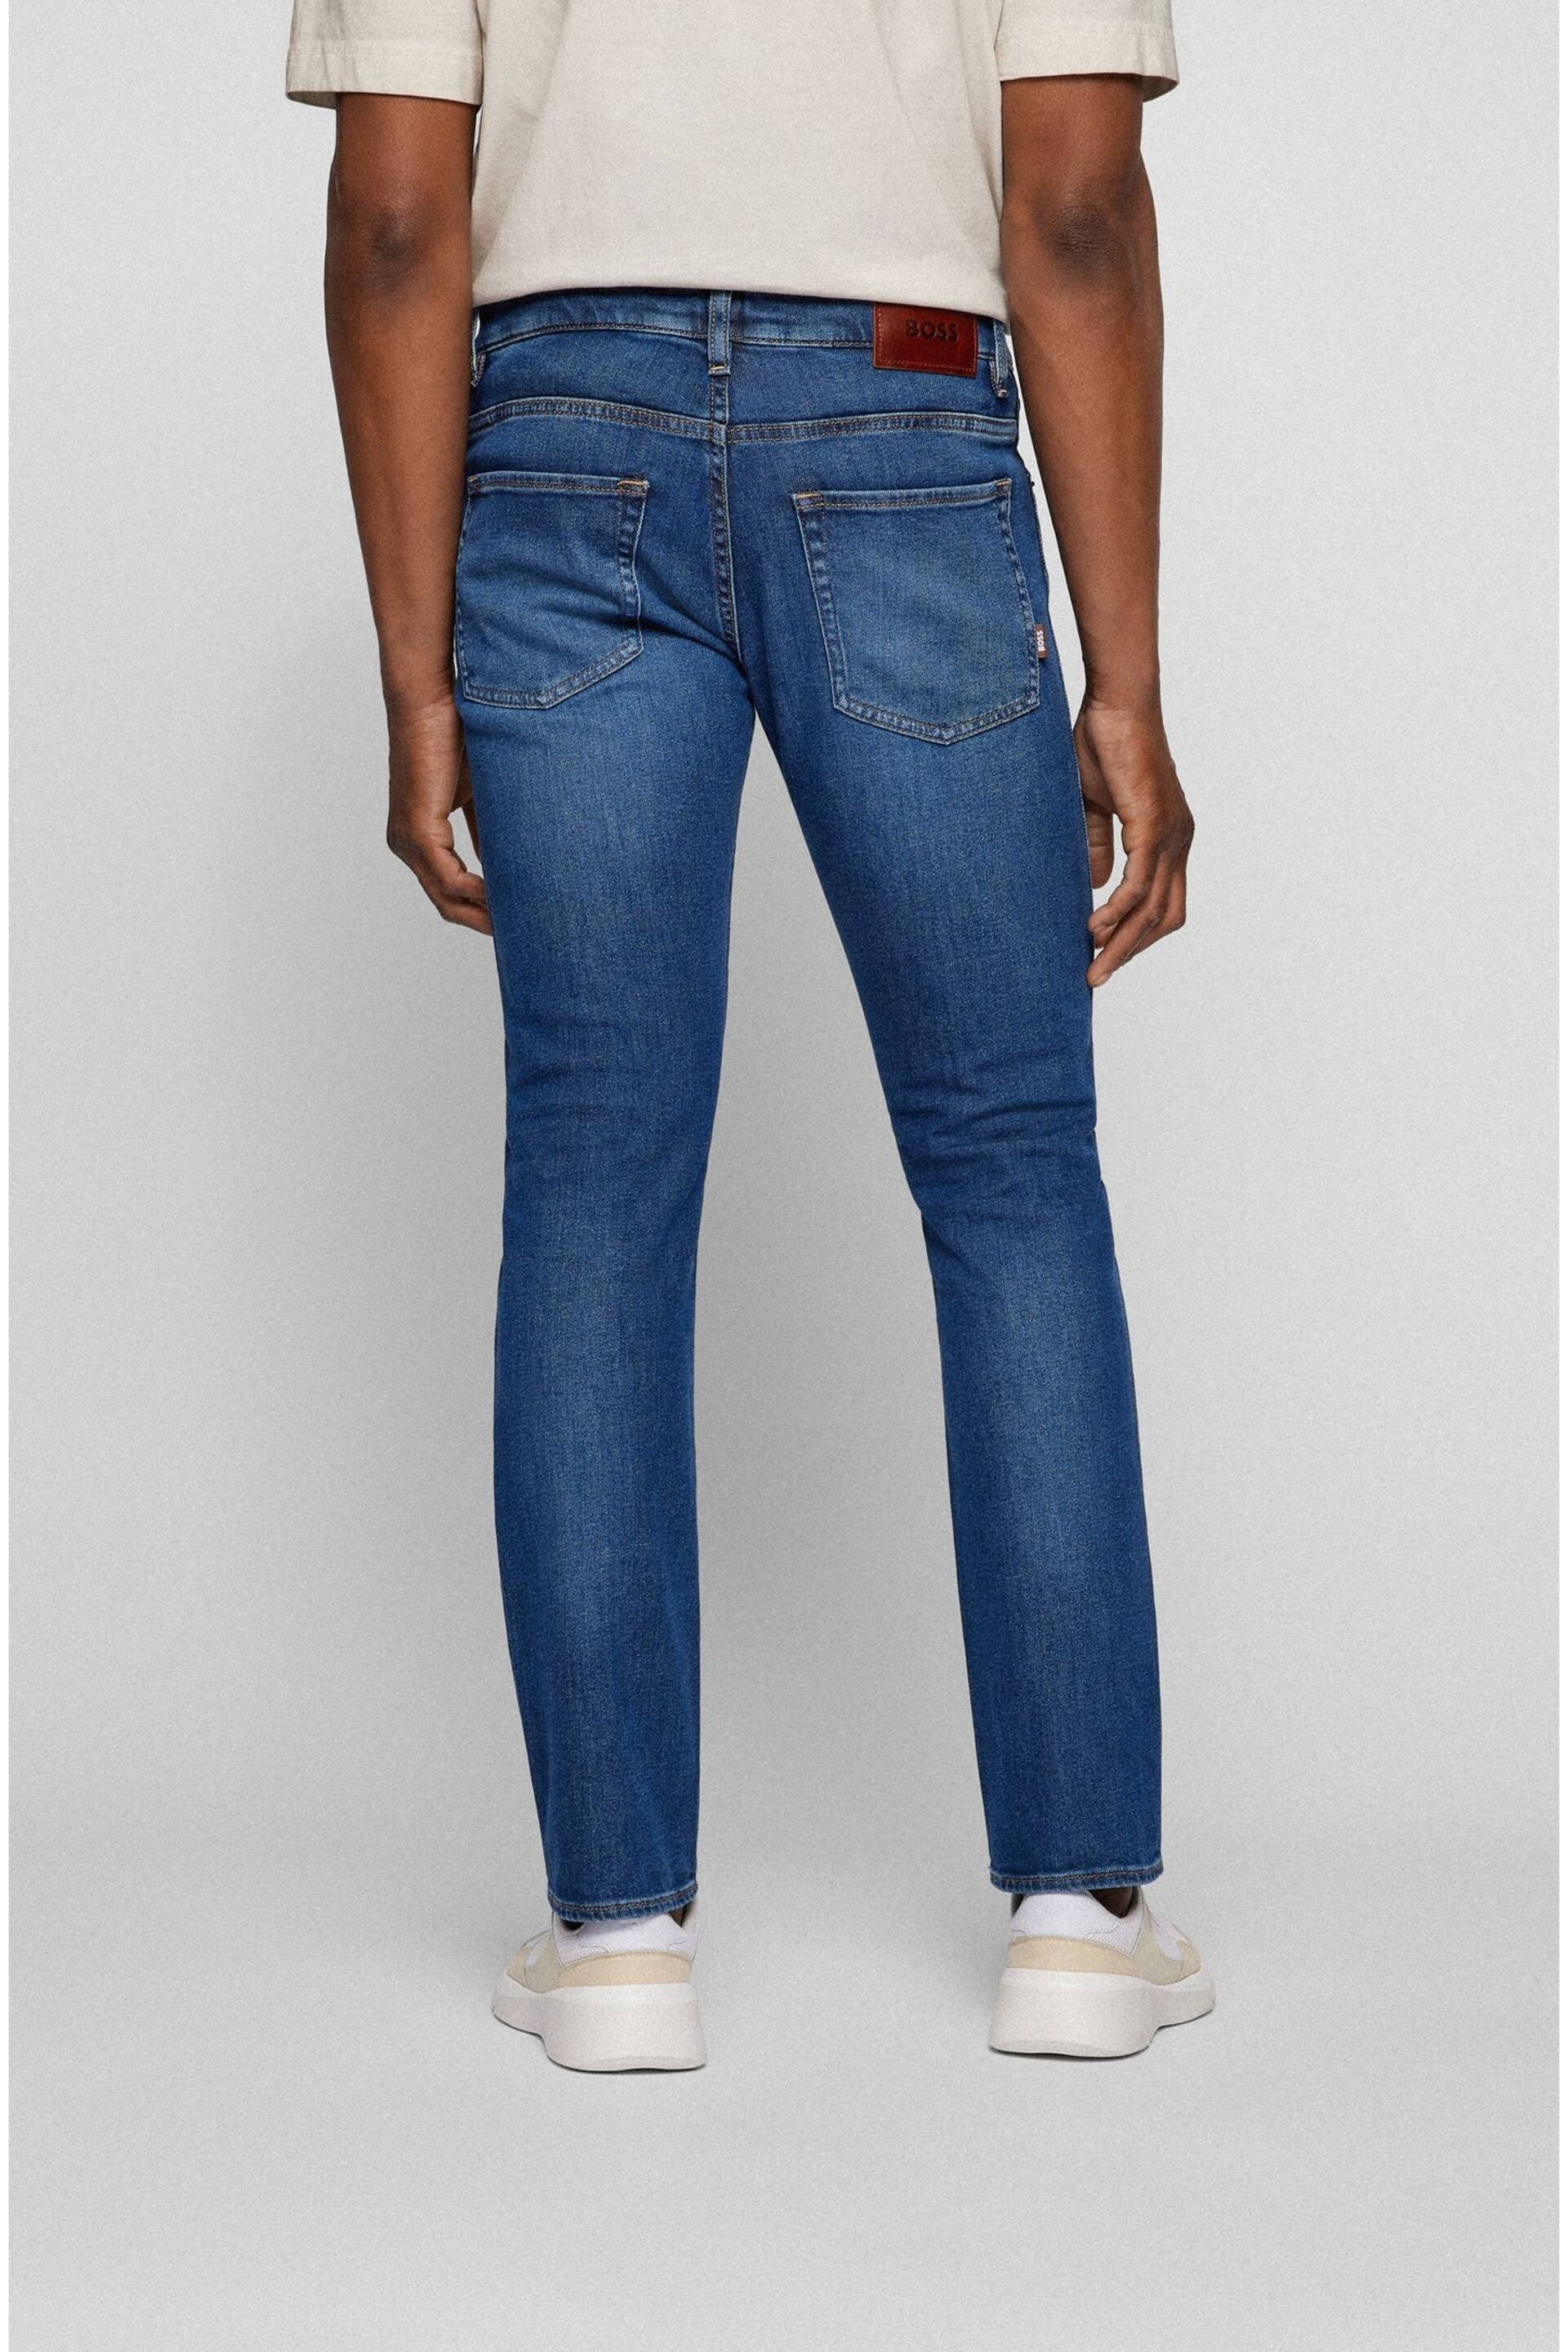 BOSS Mid Blue Delaware Slim Fit Stretch Jeans - Image 2 of 5